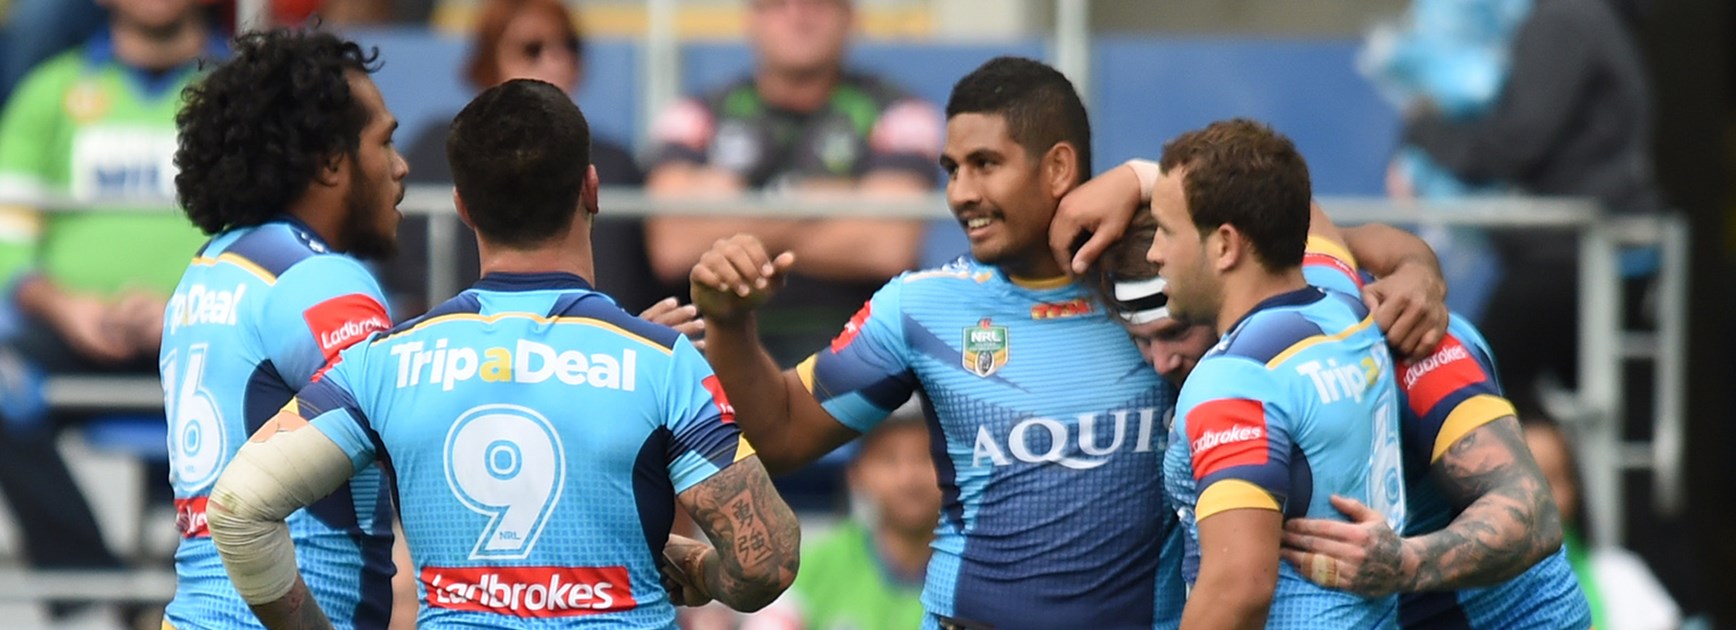 The Titans celebrate a try against the Raiders.